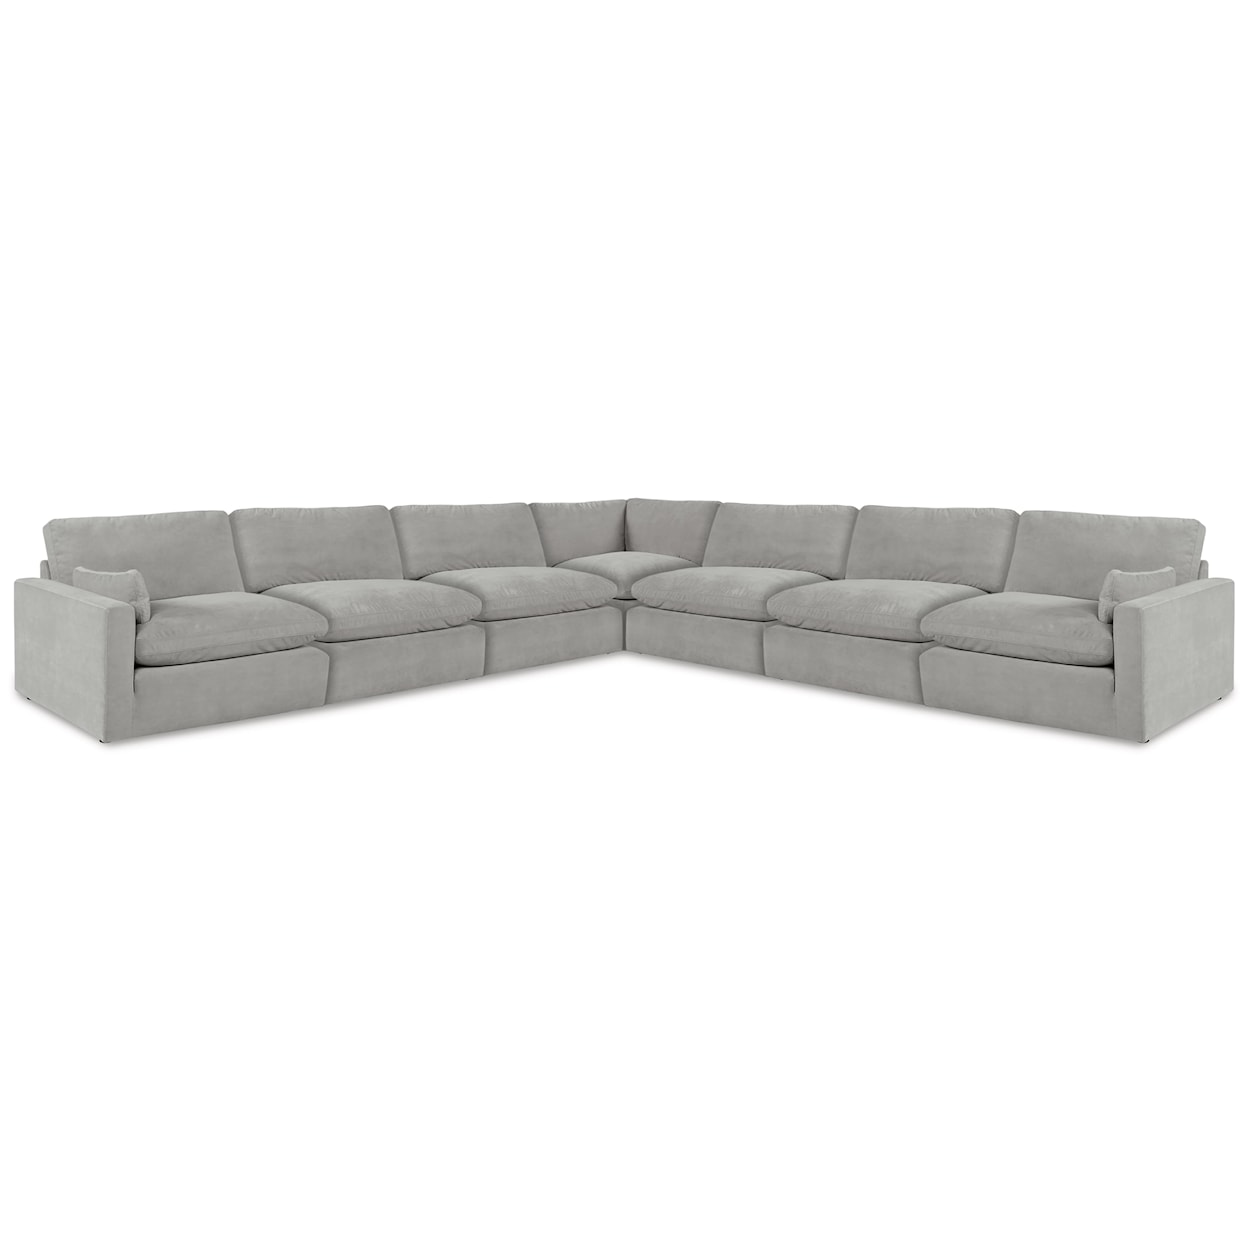 Signature Design by Ashley Sophie 7-Piece Sectional